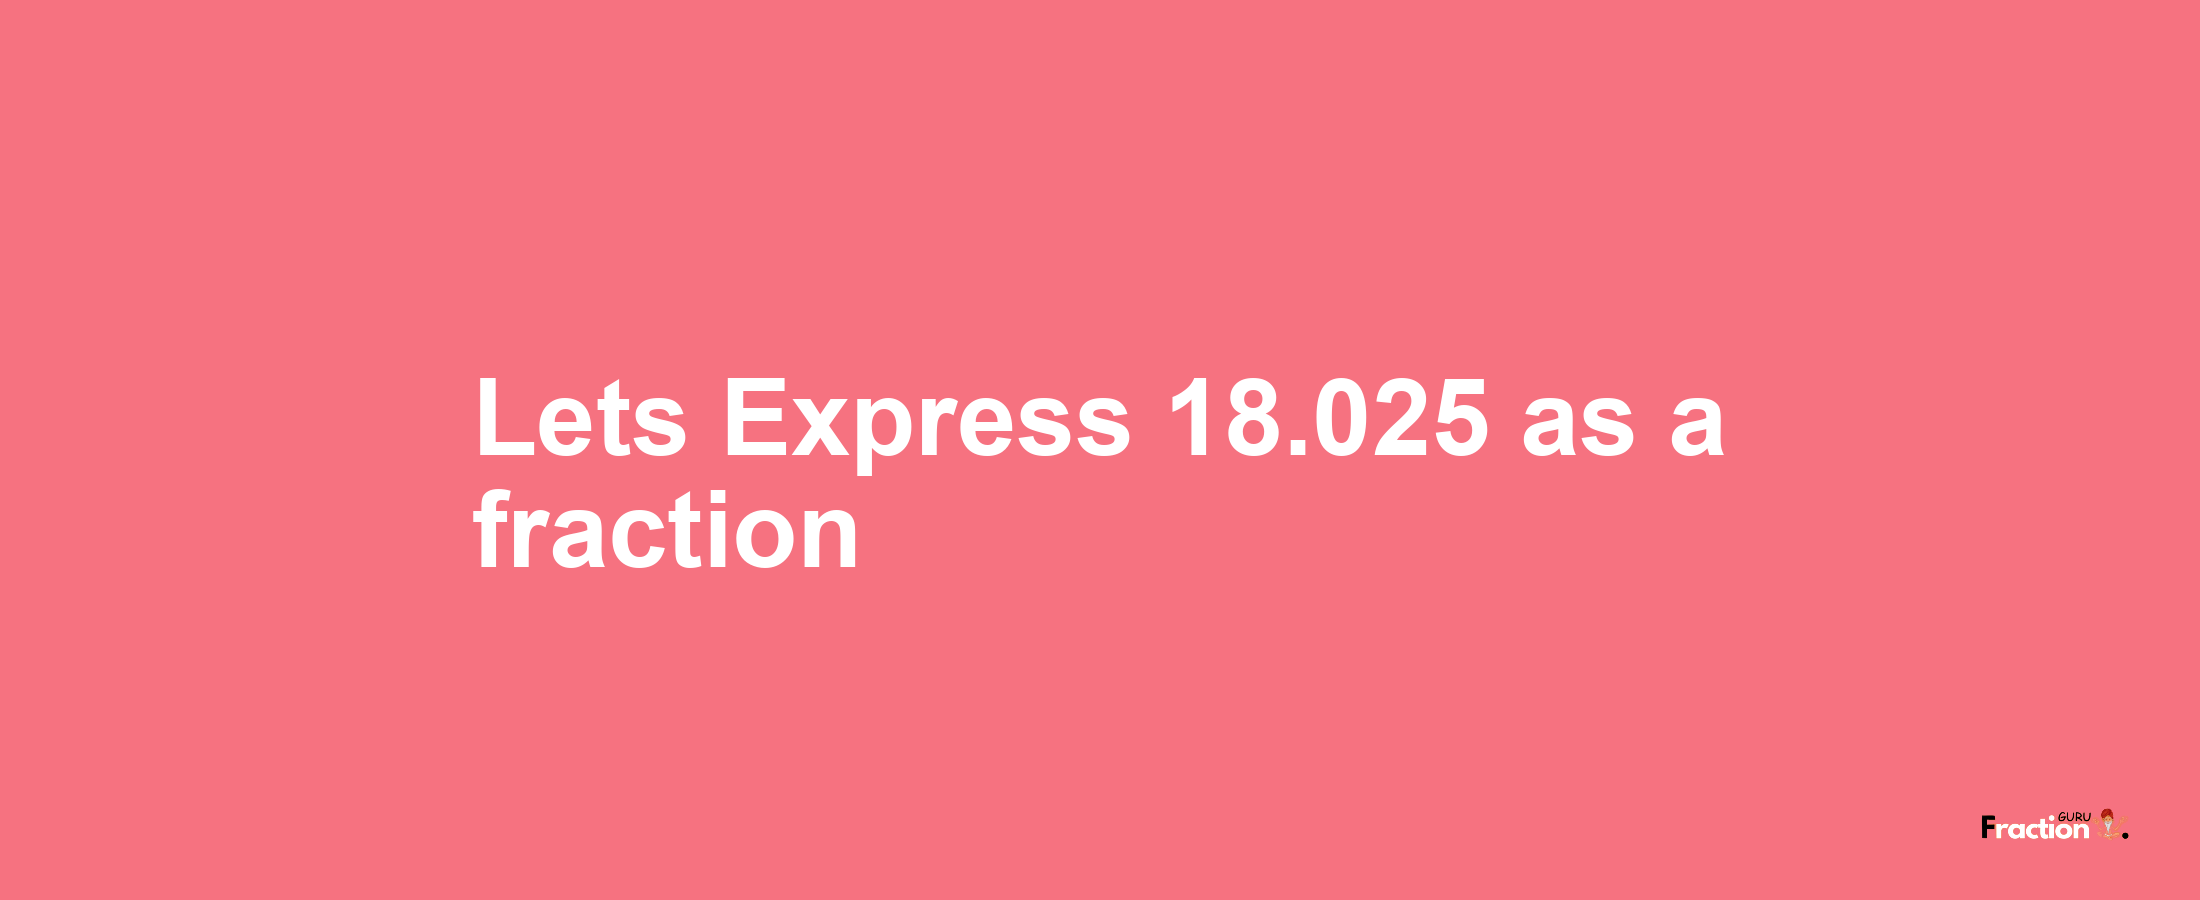 Lets Express 18.025 as afraction